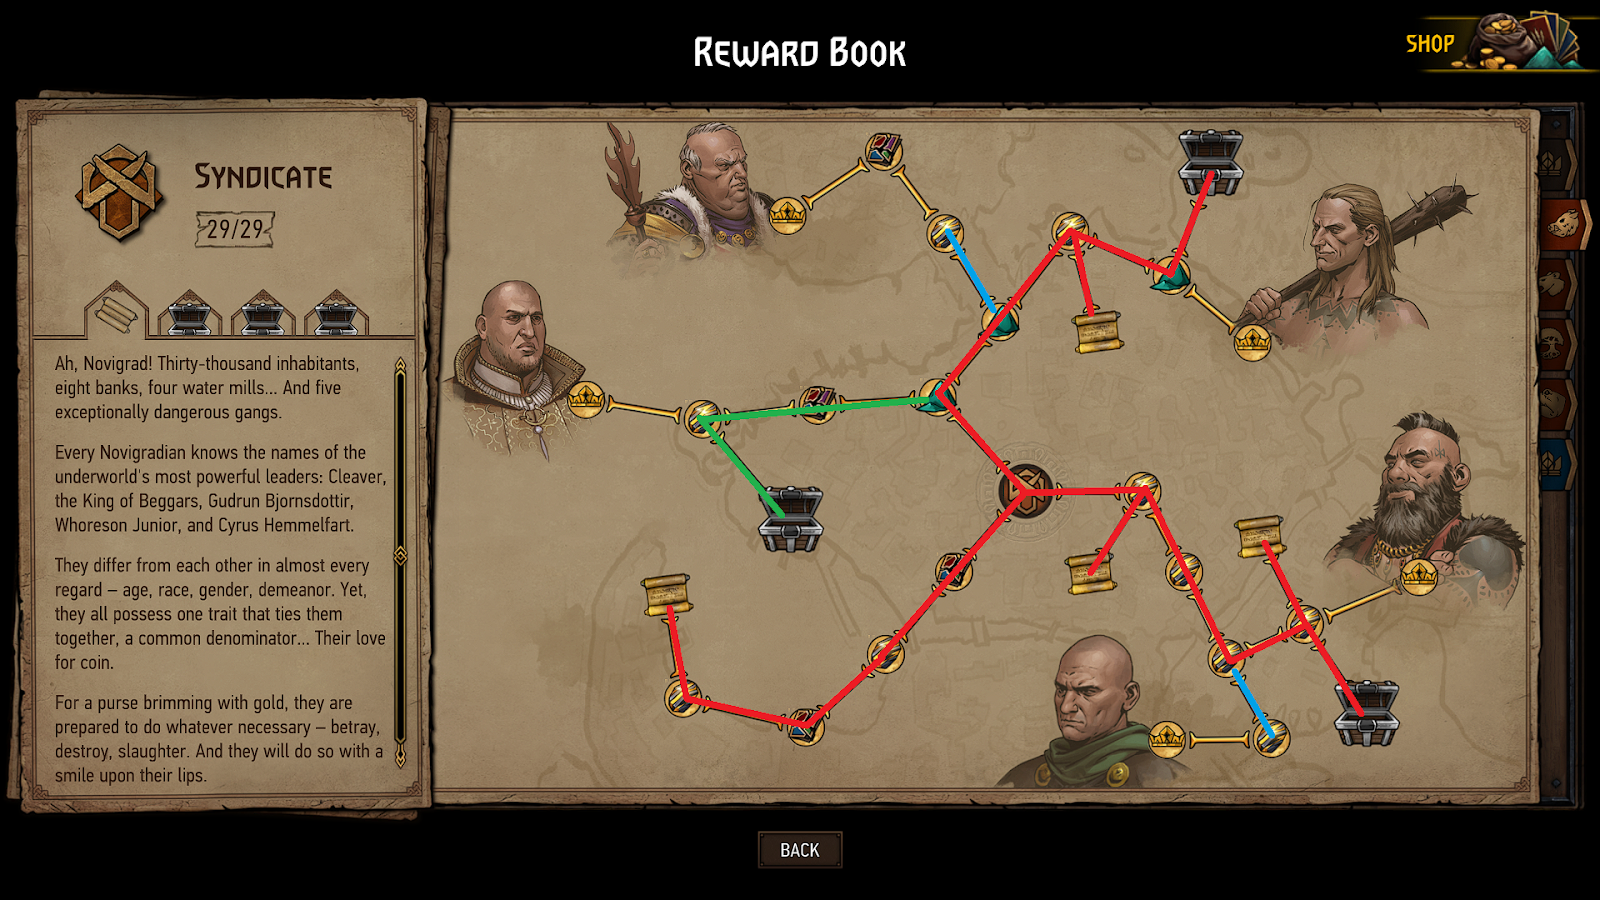 The different routes are shown in red, blue and green on the reward tree for the Syndicate